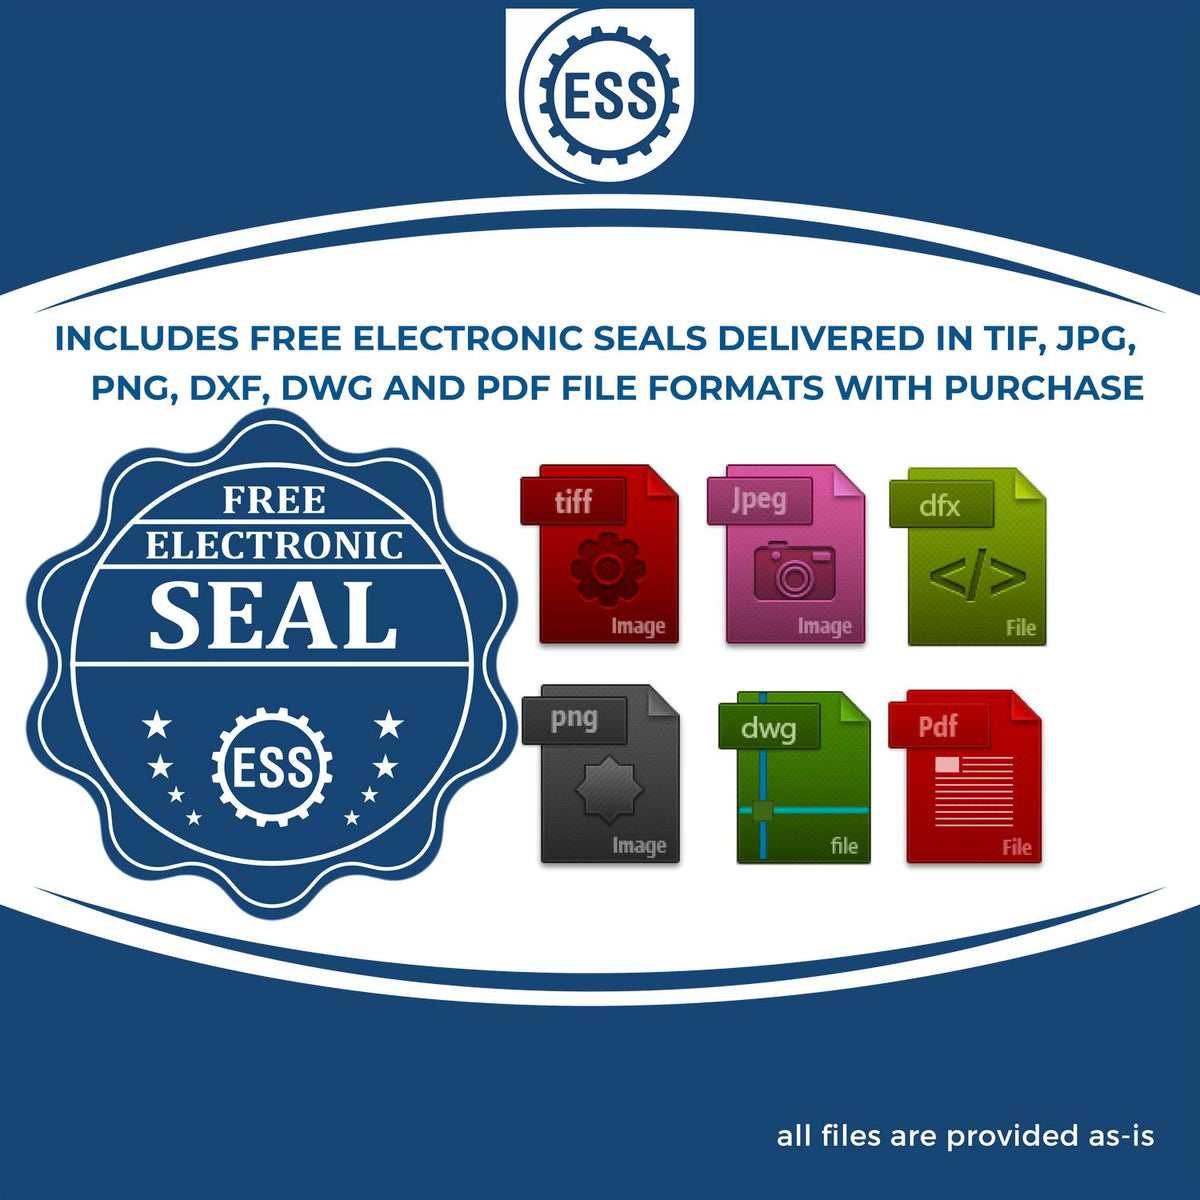 An infographic for the free electronic seal for the Premium MaxLight Pre-Inked South Dakota Landscape Architectural Stamp illustrating the different file type icons such as DXF, DWG, TIF, JPG and PNG.